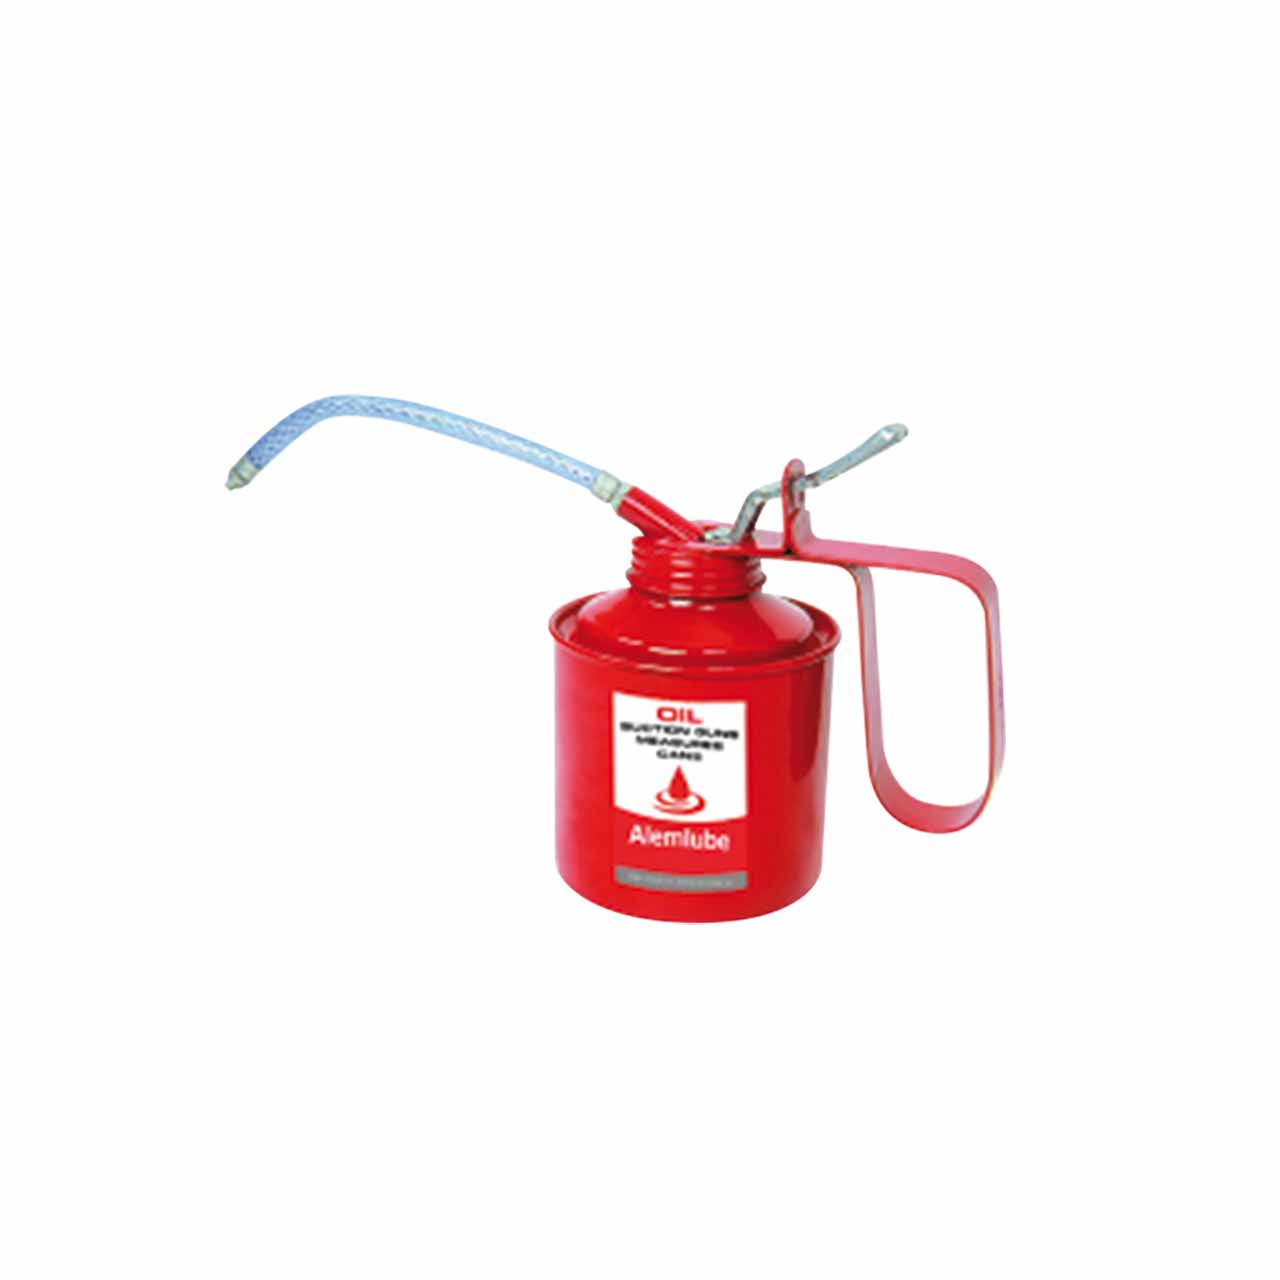 7330A Alemlube Metal Force Feed Oil Cans 375ml with Flexible Spout